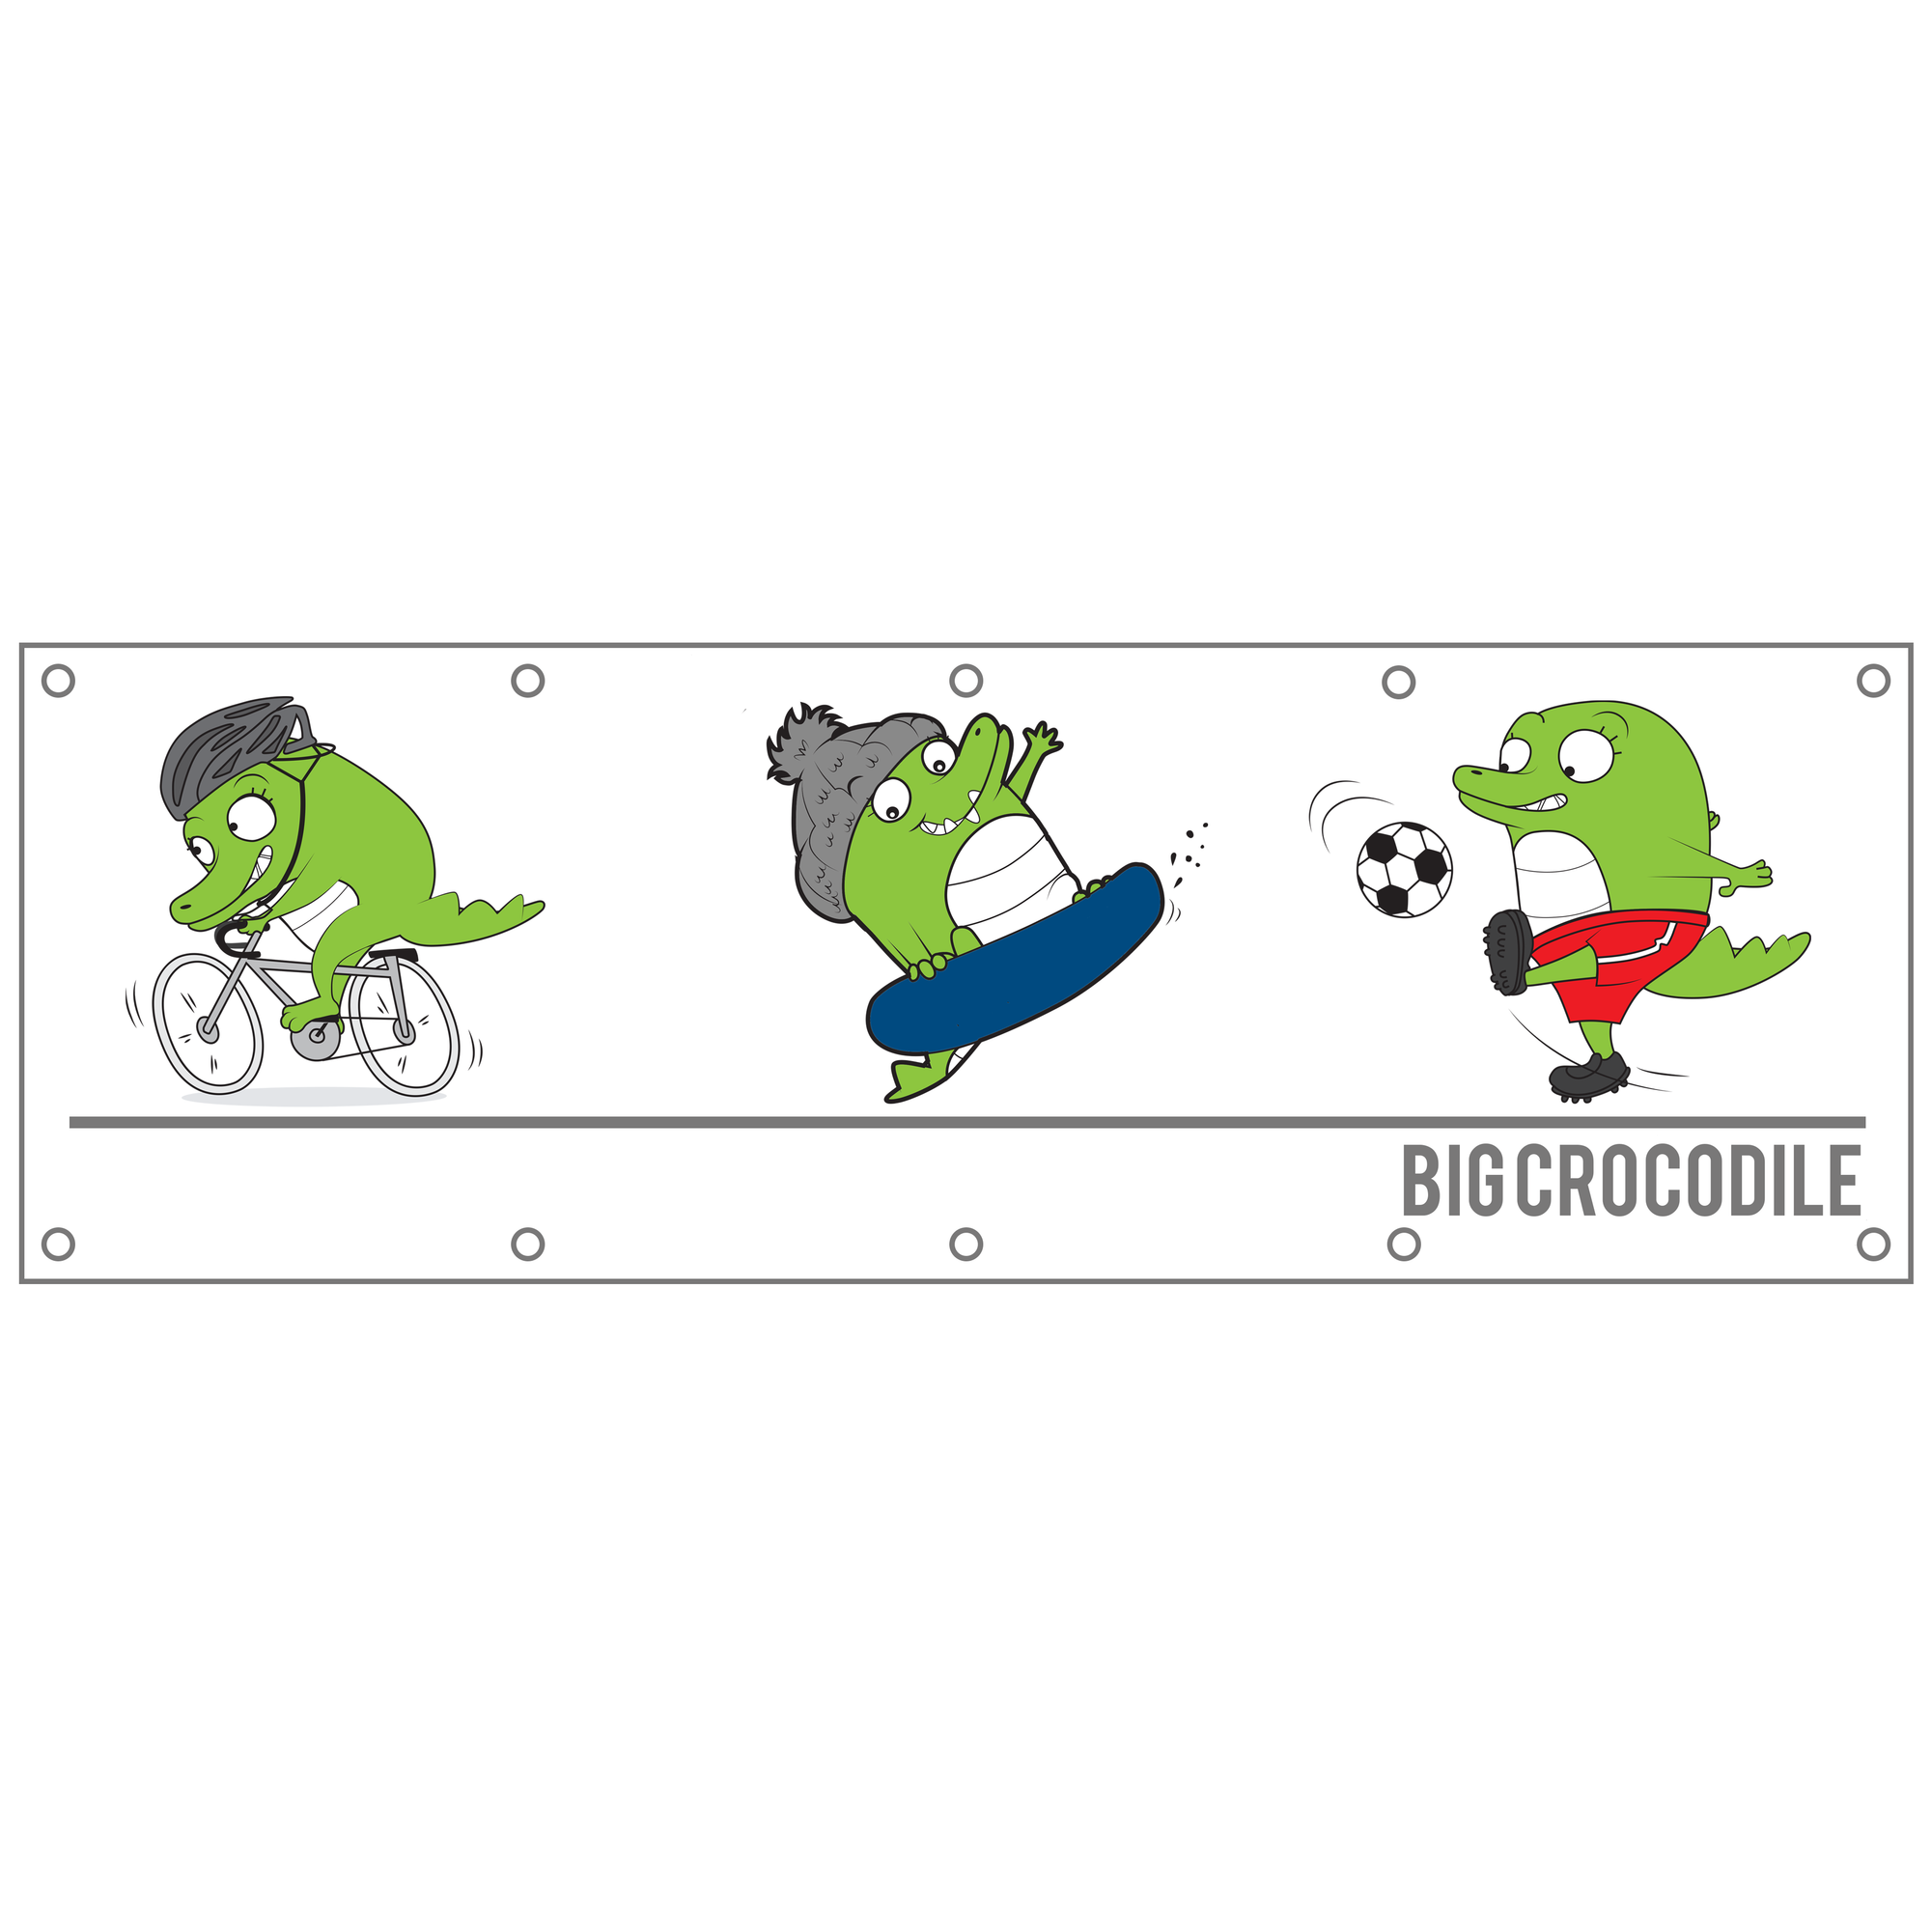 Banner - Big Crocodile Banner - Build Your Own